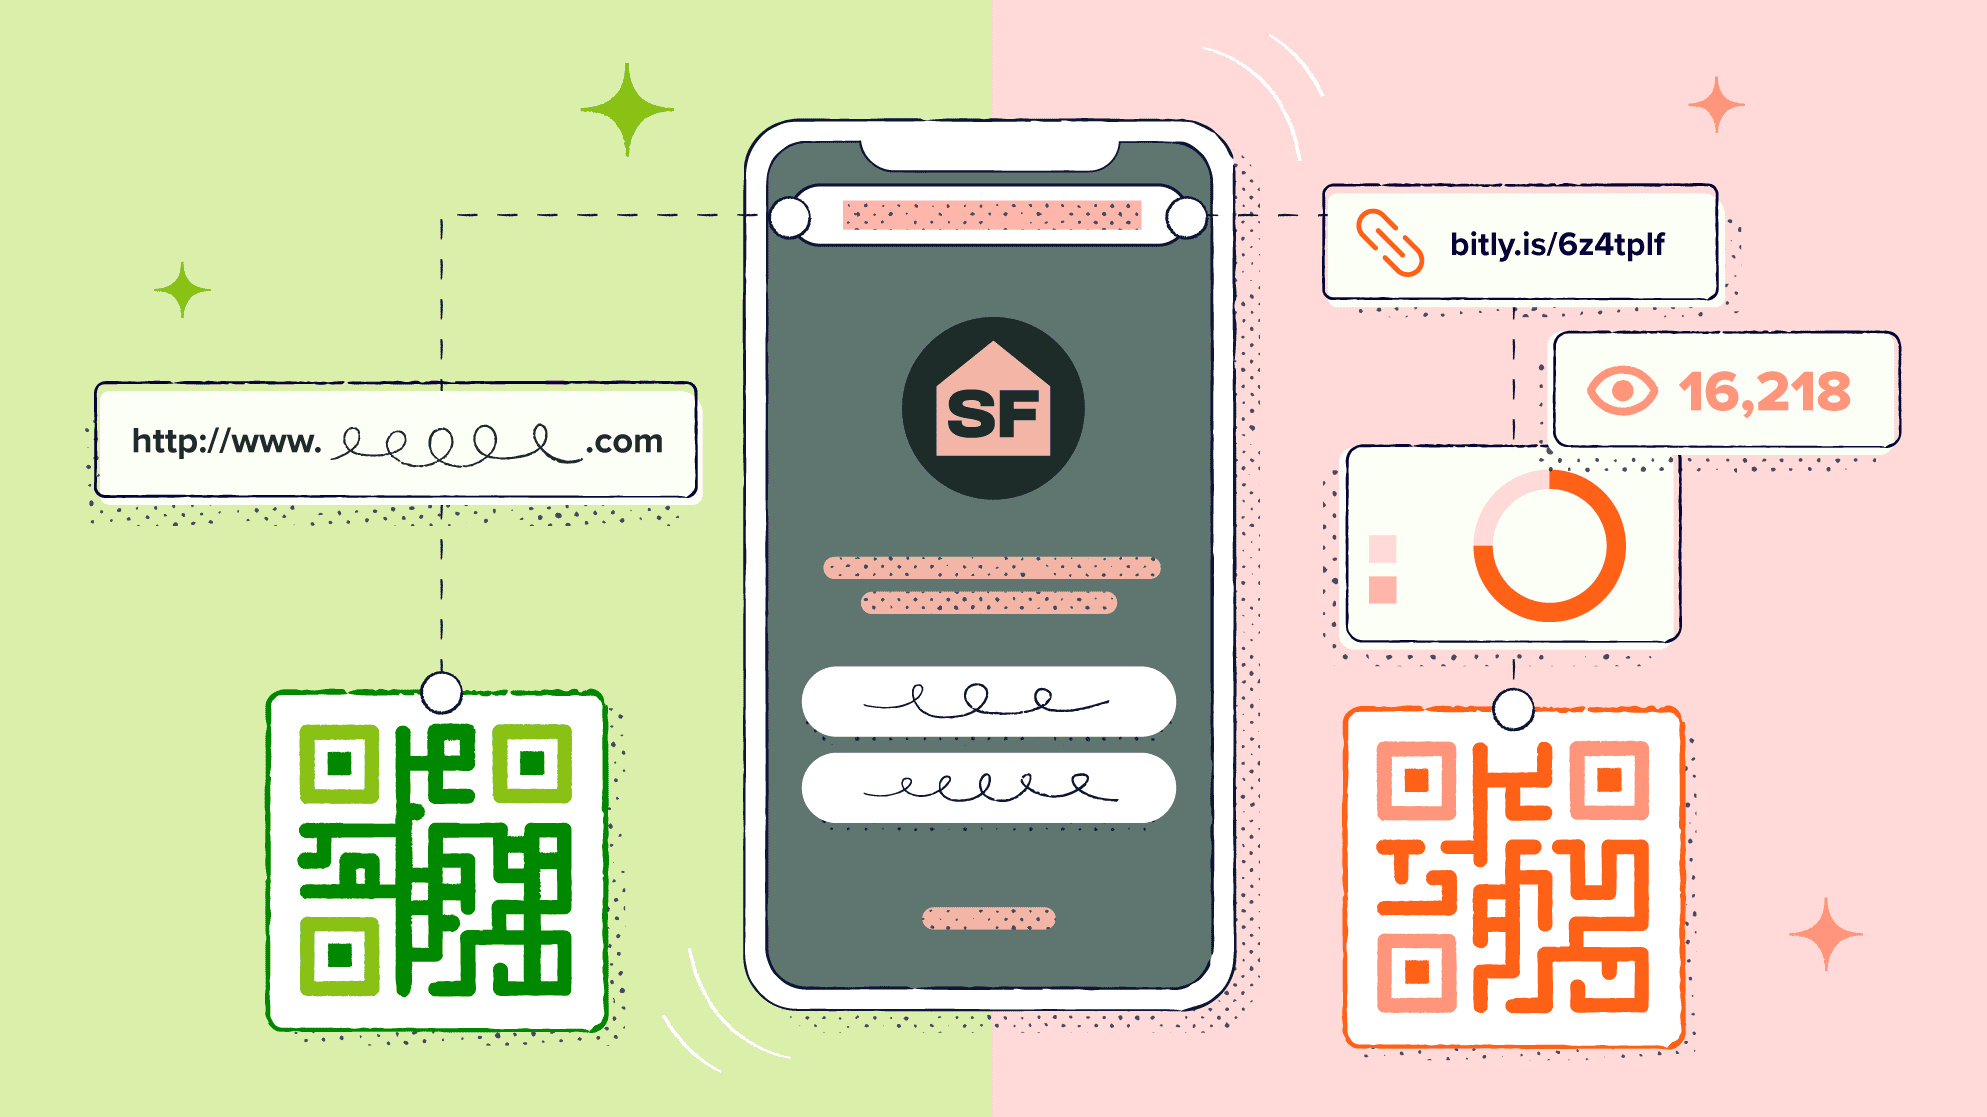 static-vs-dynamic-qr-codes-when-to-use-each-bitly